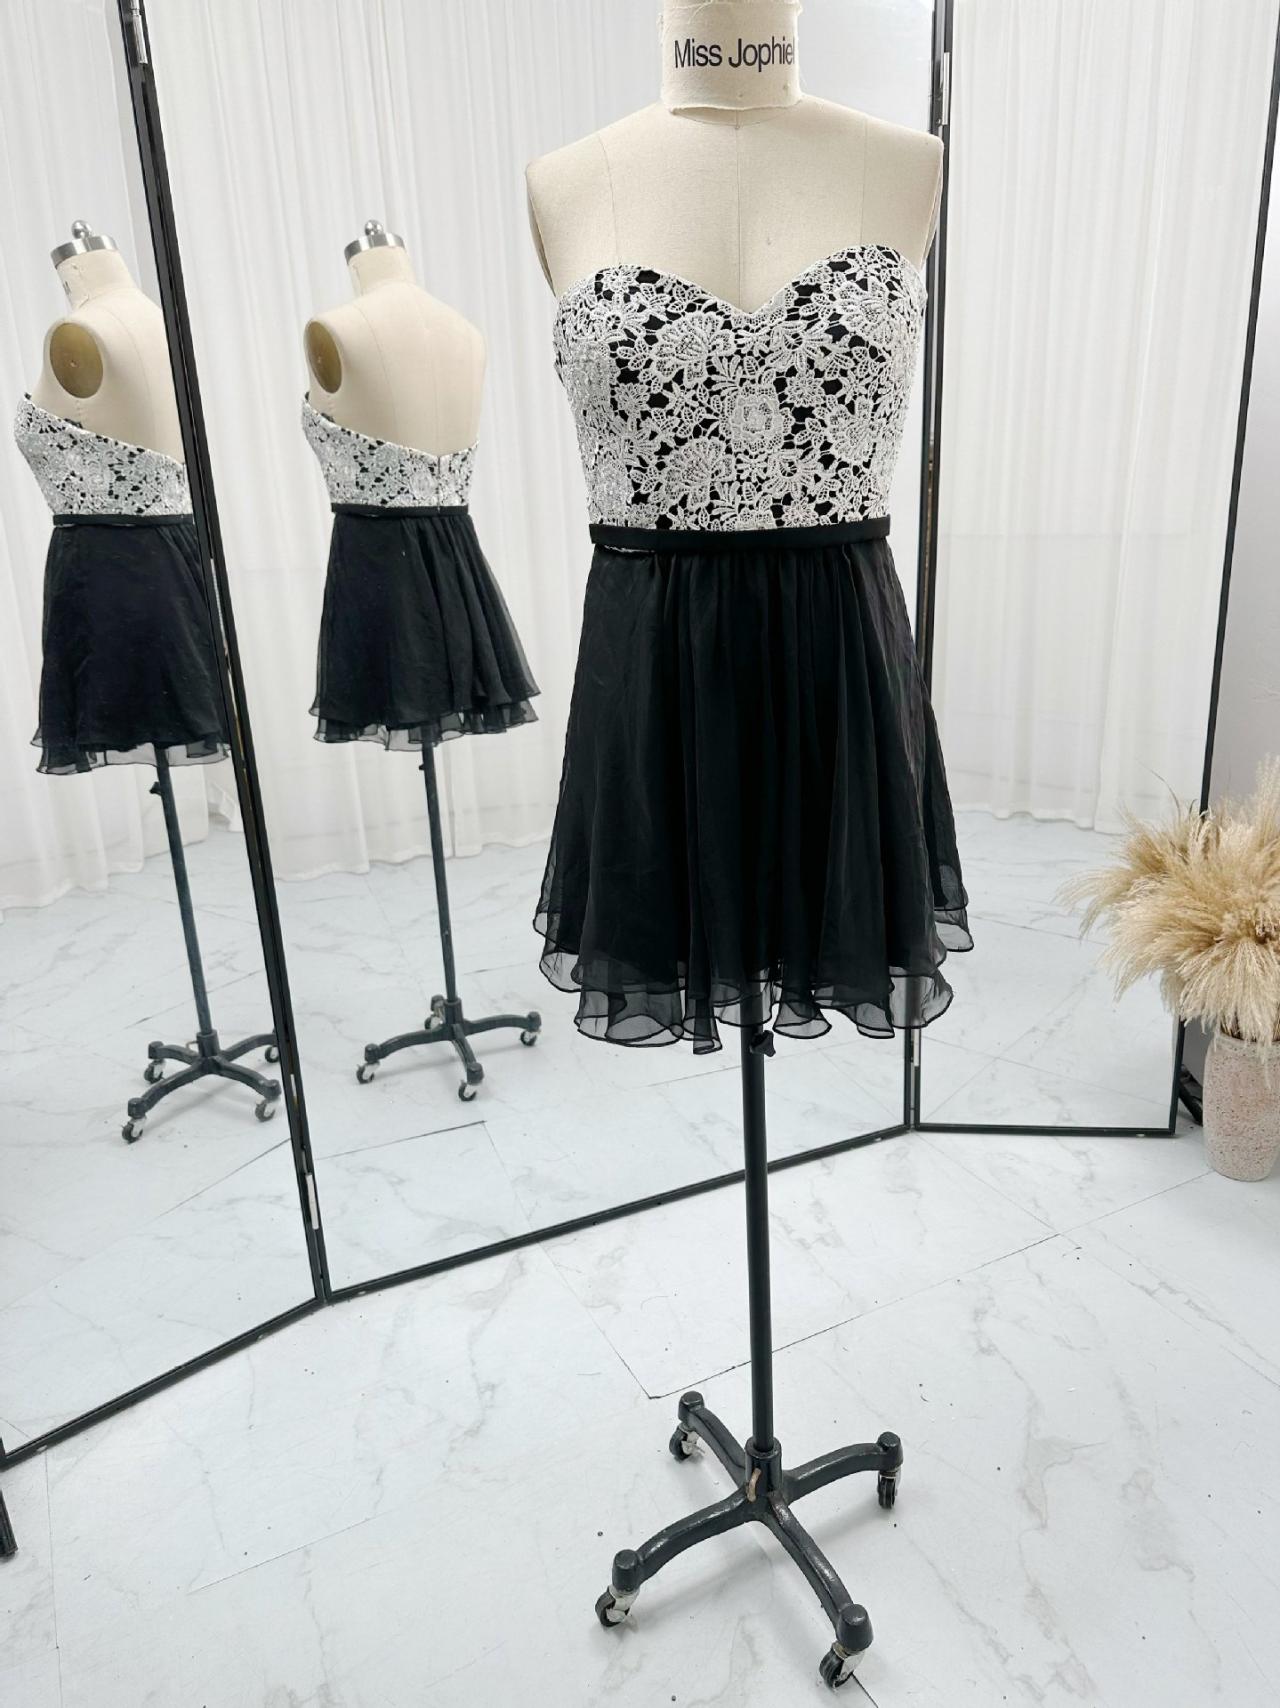 Sweetheart Neckline Short Black Party Dress With White Lace